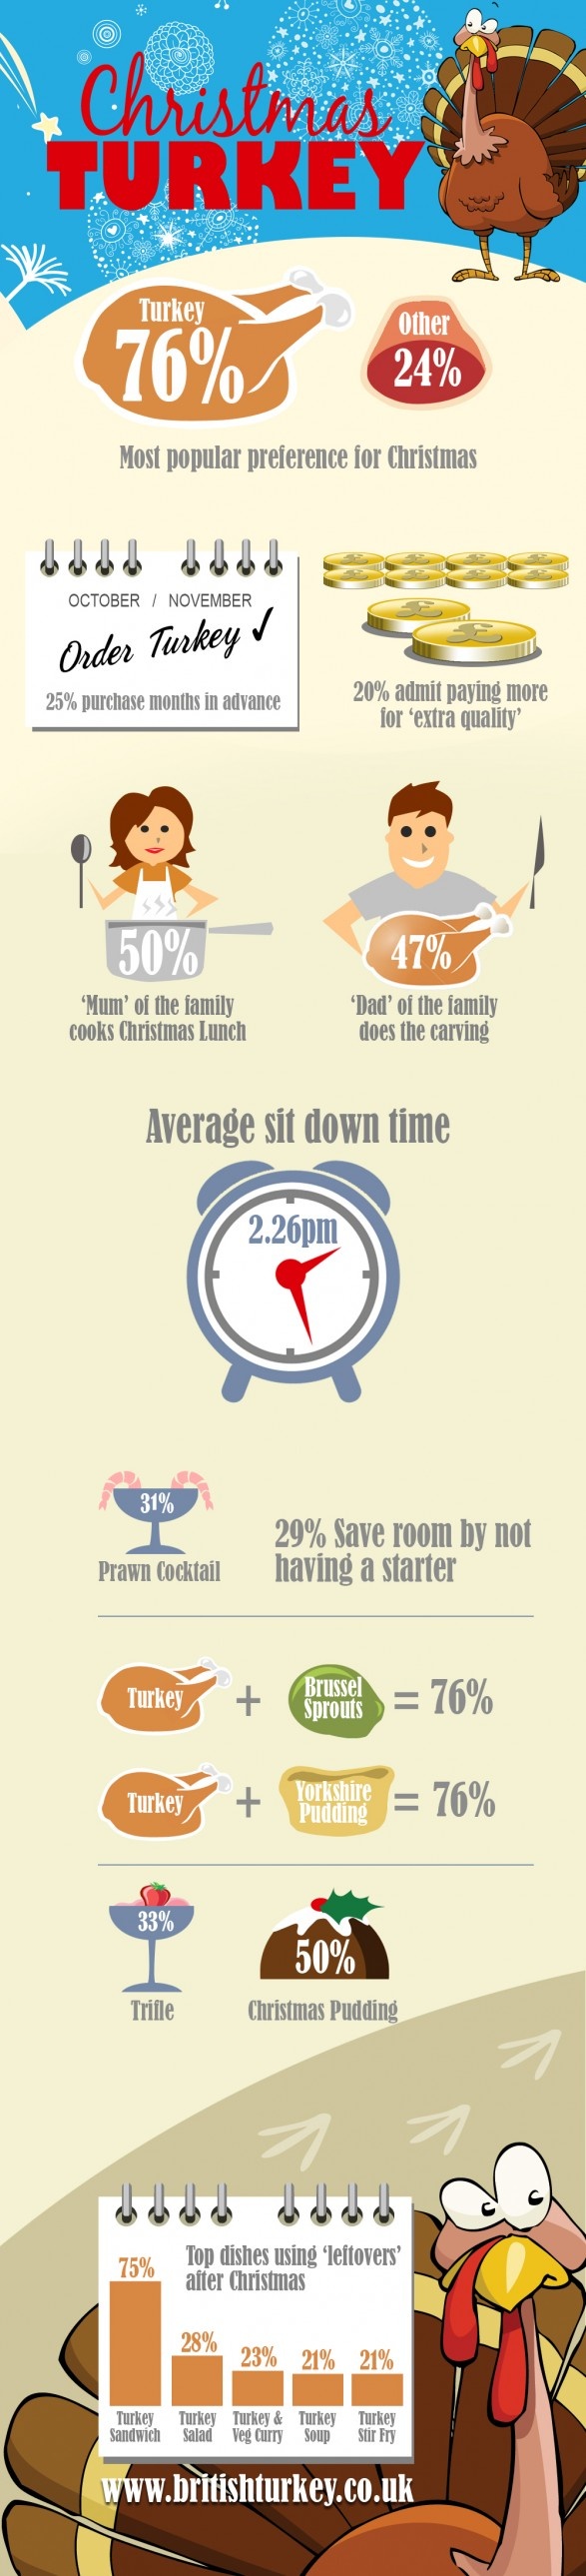 Christmas Turkey Facts & Stats